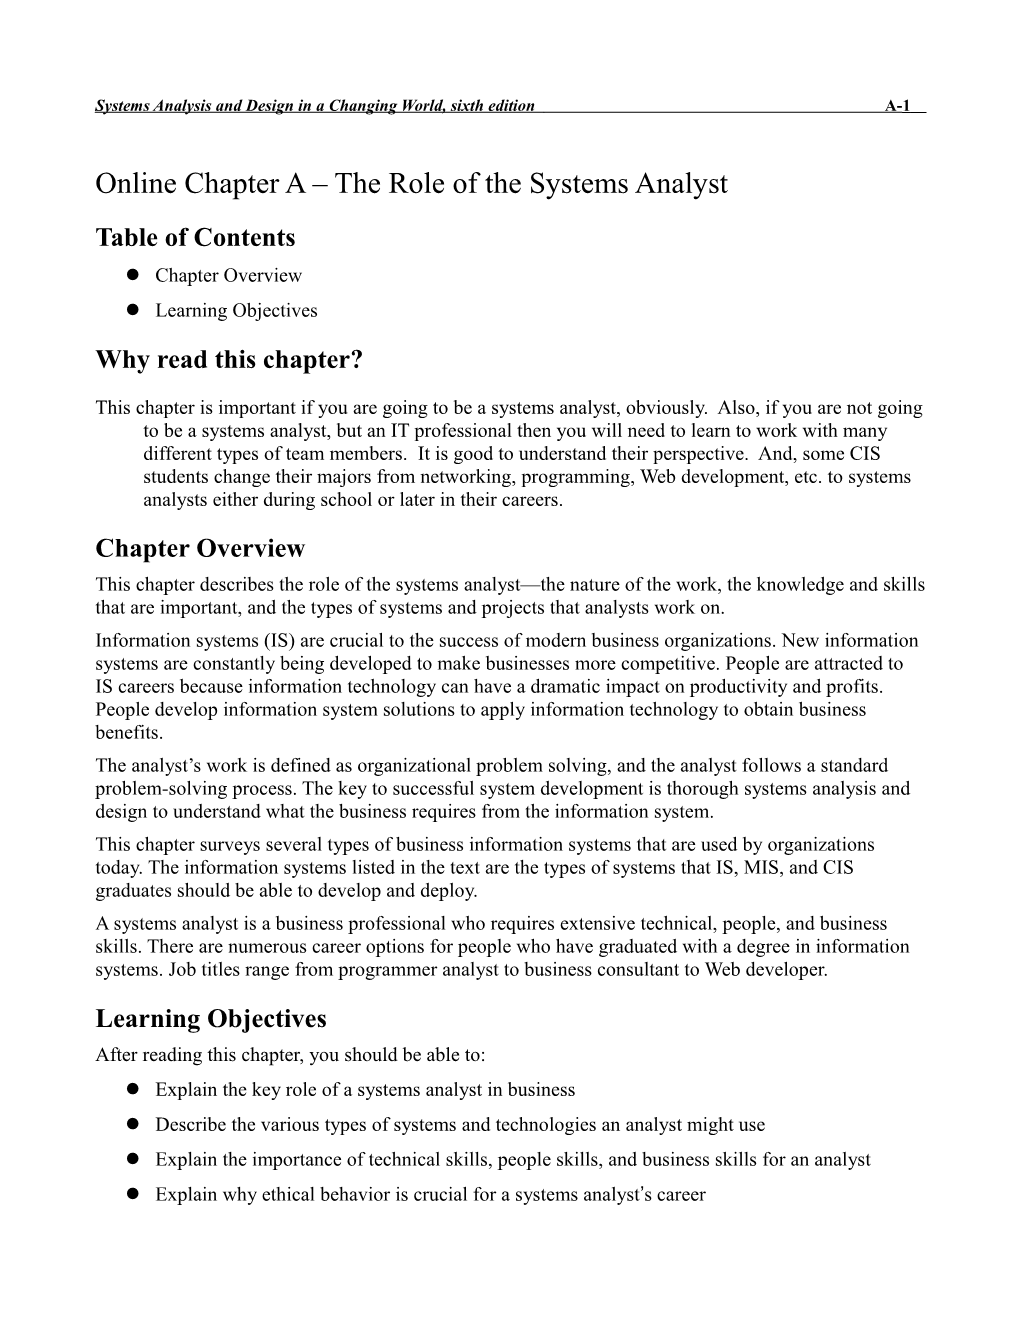 Systems Analysis and Design in a Changing World, Sixth Edition A-1